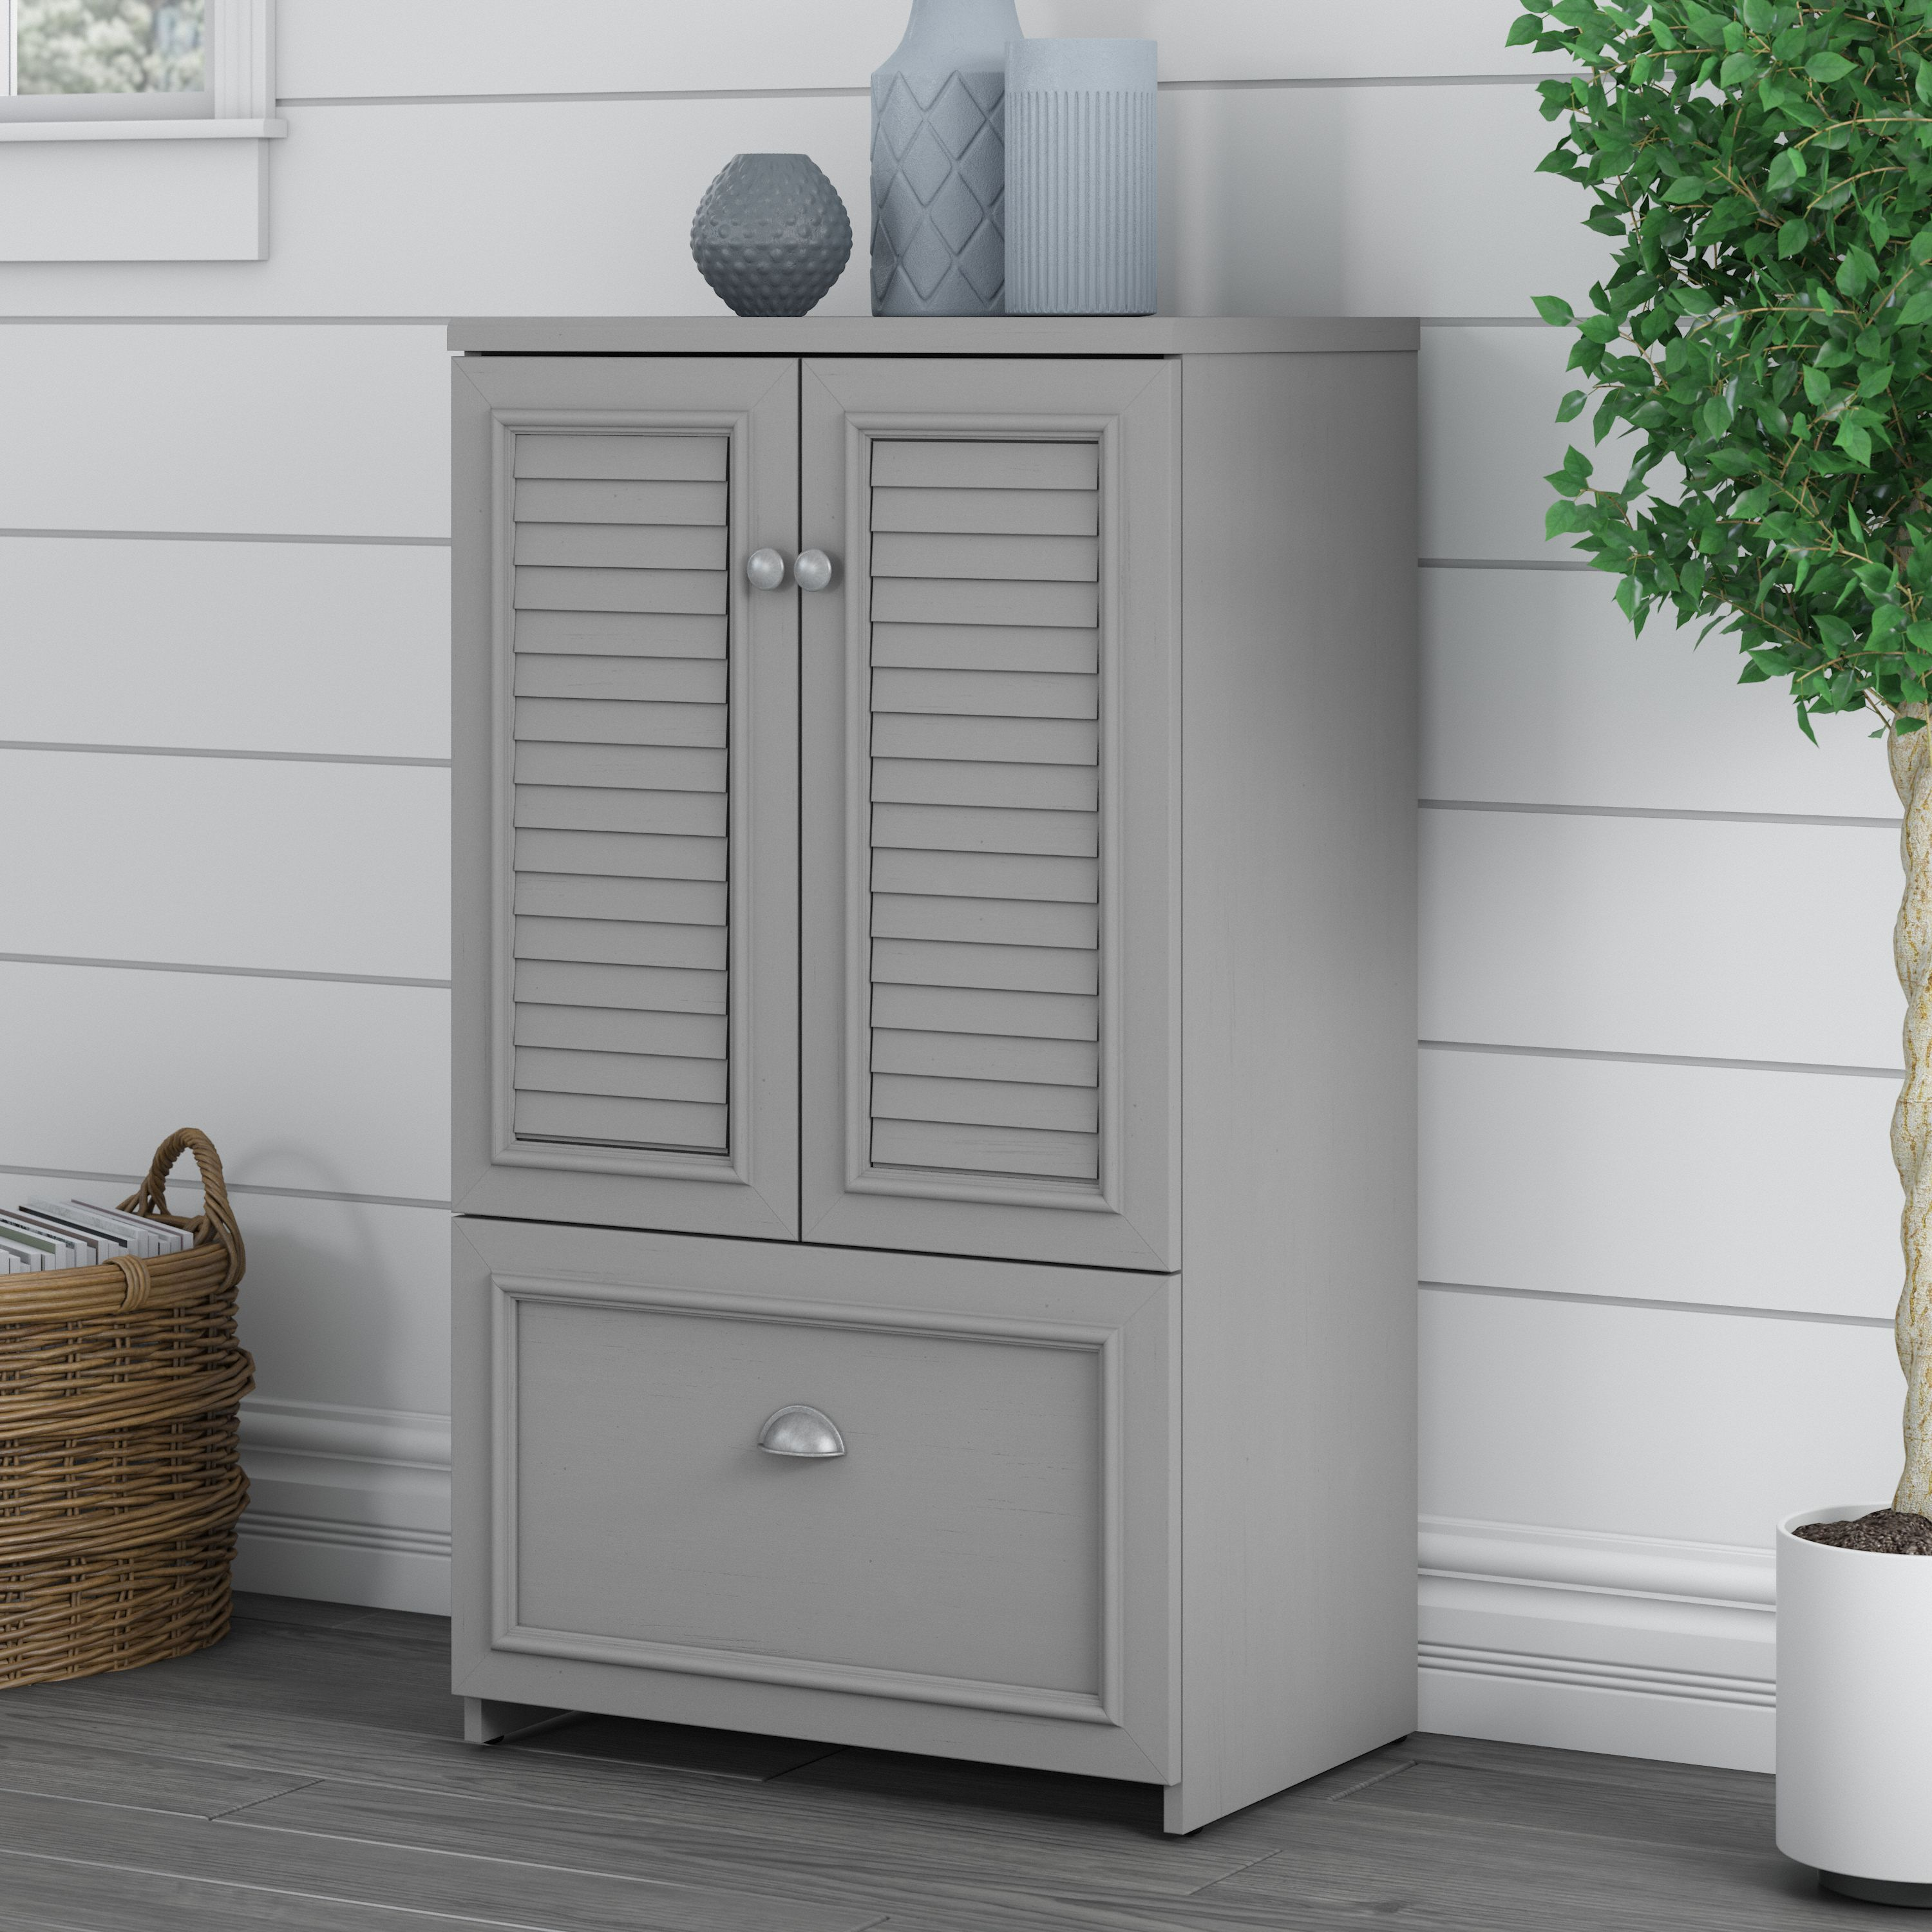 Shop Bush Furniture Fairview 2 Door Storage Cabinet with File Drawer 01 WC53580-03 #color_cape cod gray